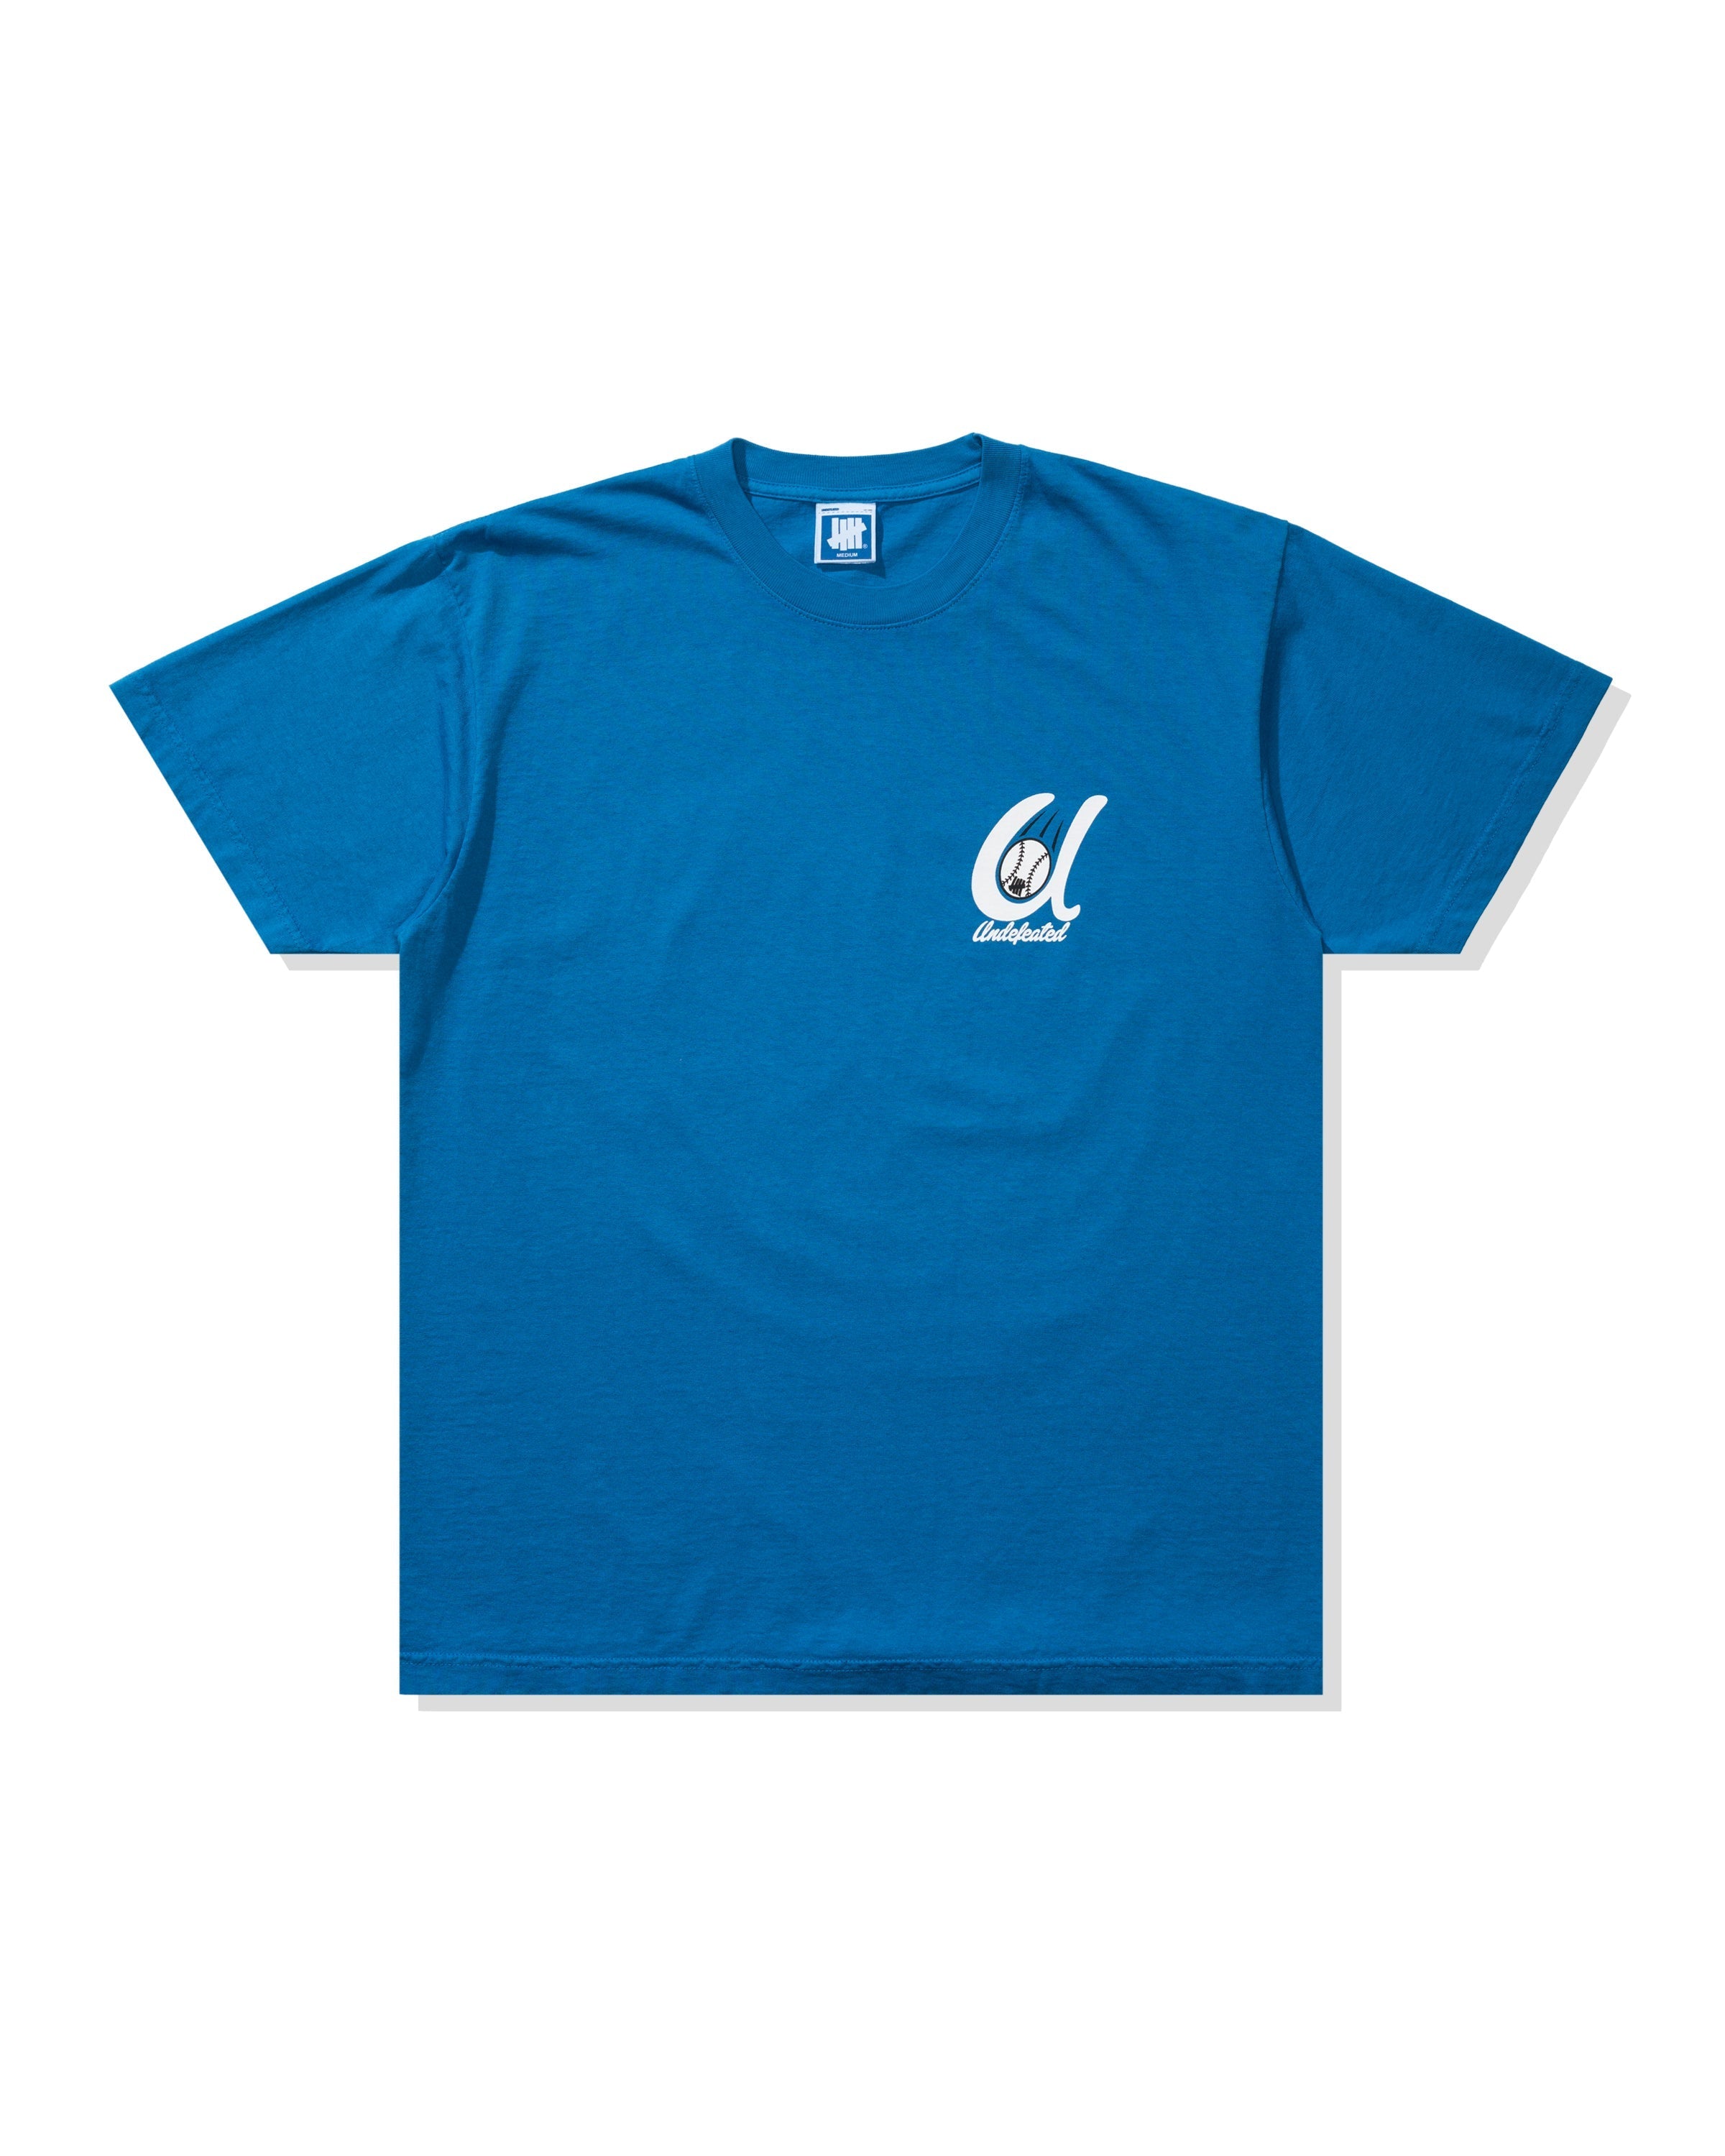 UNDEFEATED SPORT S/S TEE L